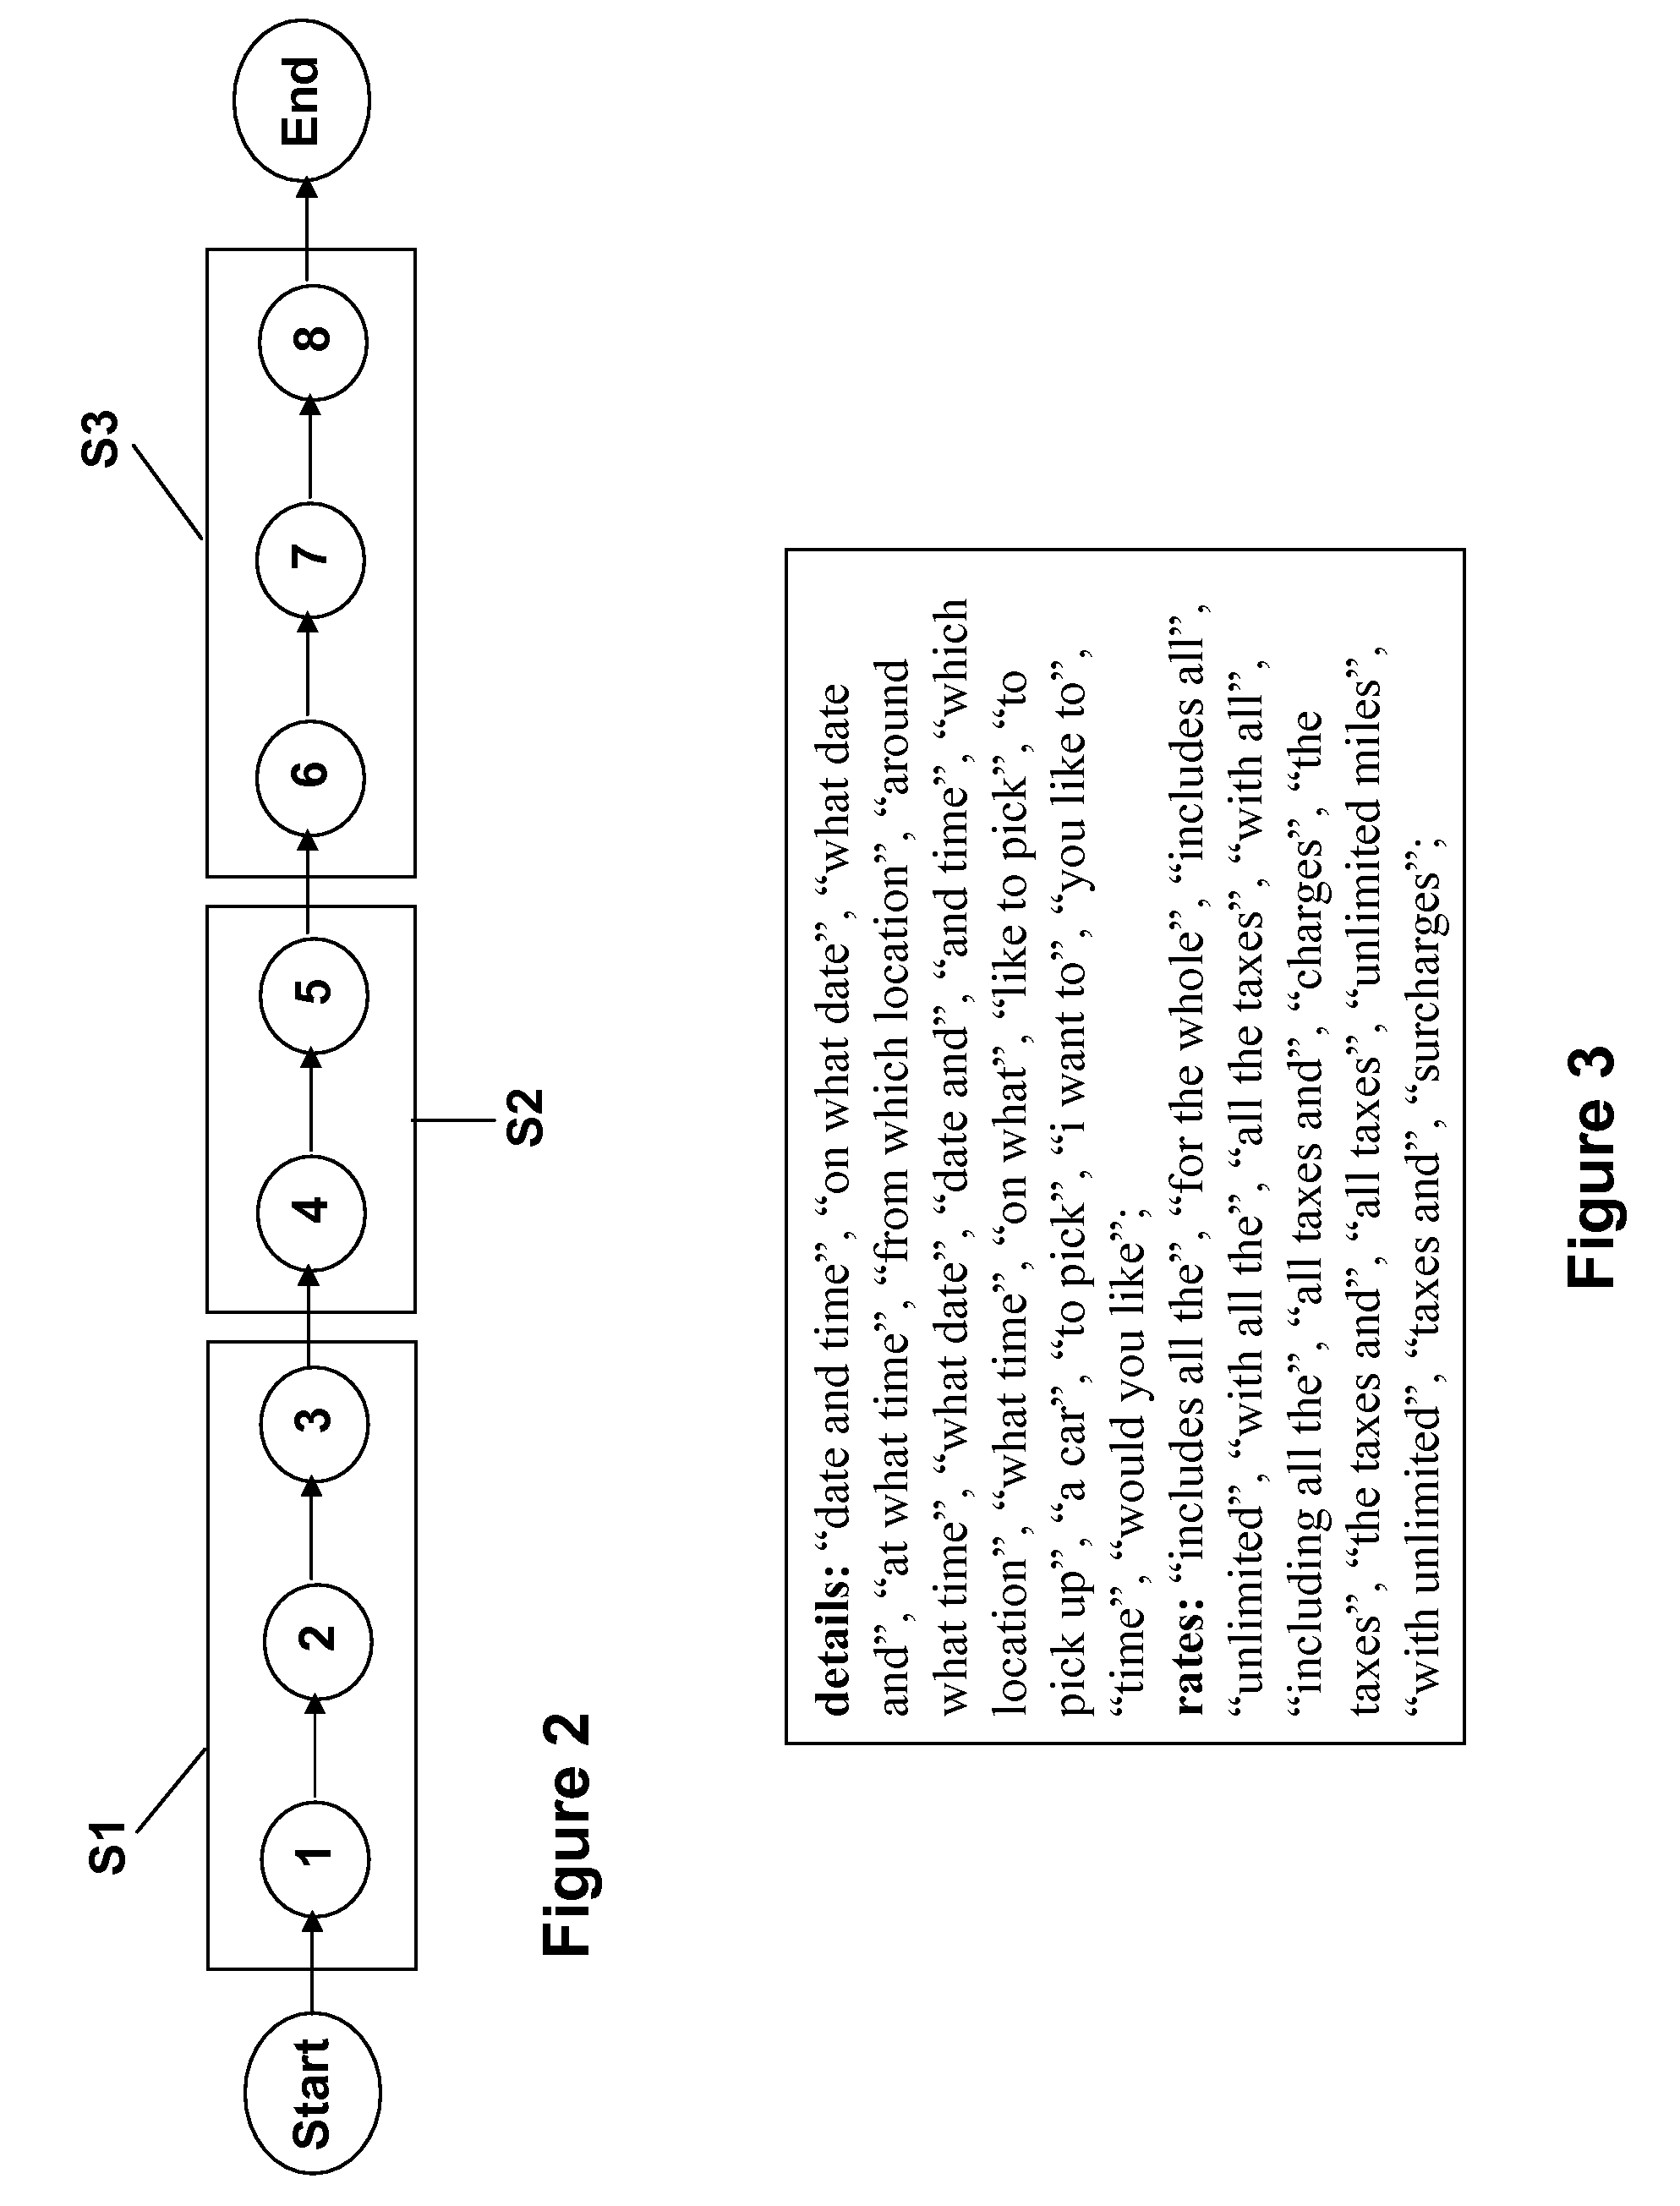 Method for segmenting communication transcripts using unsupervised and semi-supervised techniques